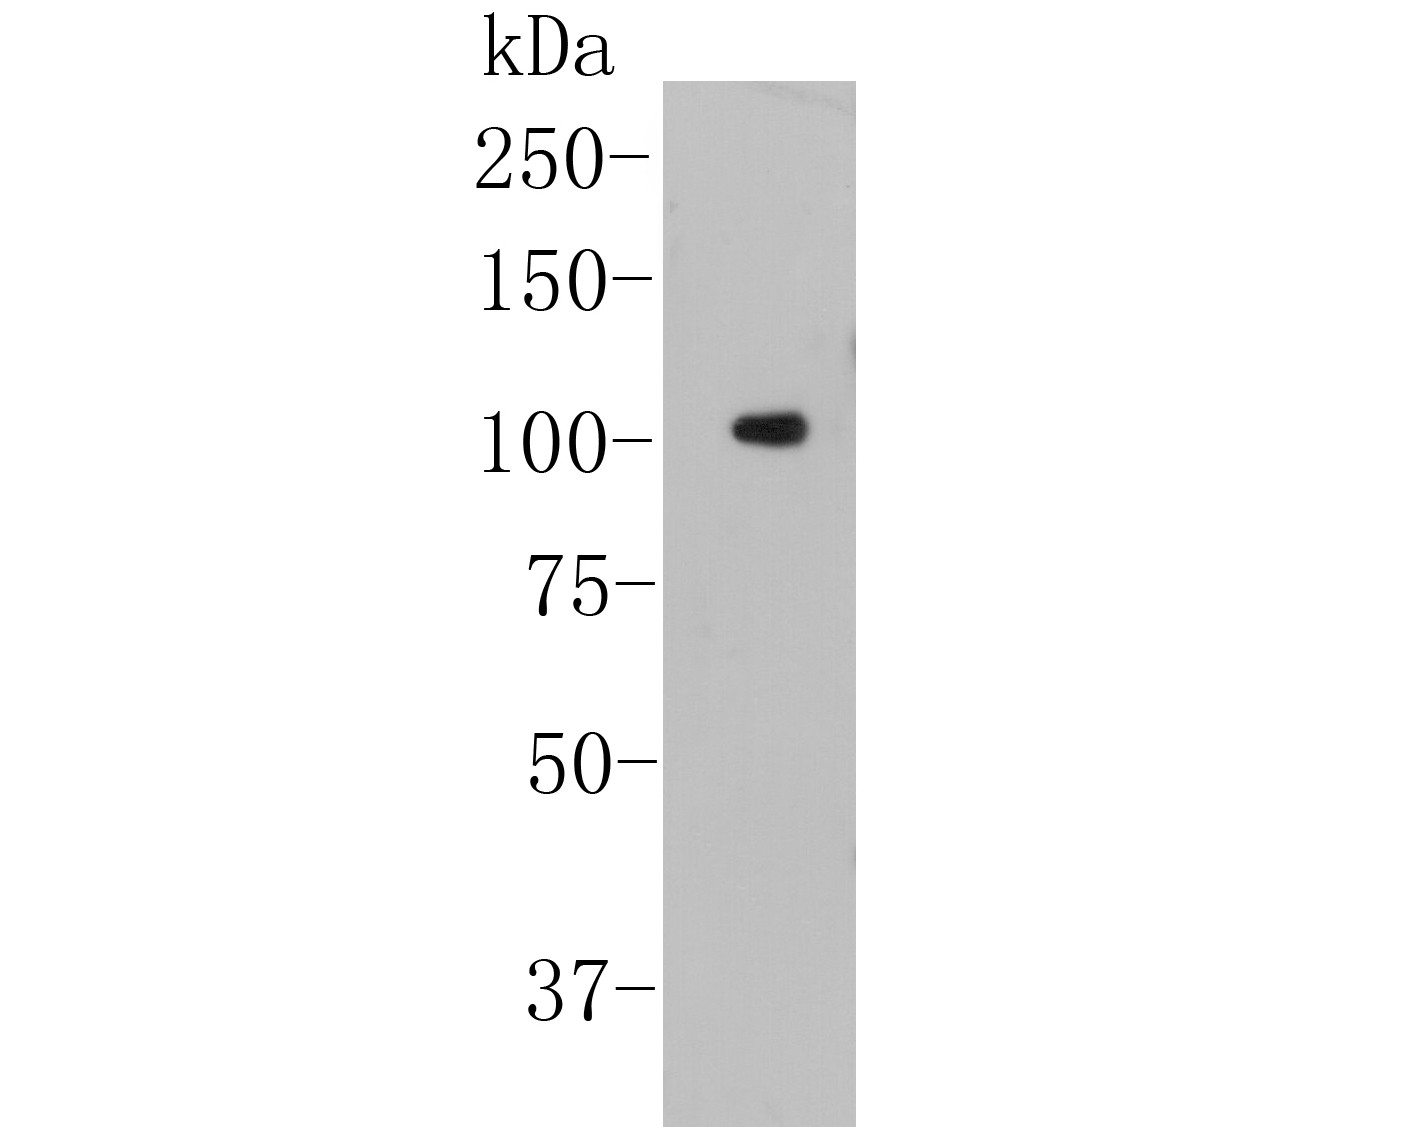 Western blot analysis of NFKB2 on A431 cell lysate. Proteins were transferred to a PVDF membrane and blocked with 5% BSA in PBS for 1 hour at room temperature. The primary antibody (EM1901-79, 1/500) was used in 5% BSA at room temperature for 2 hours. Goat Anti-Mouse IgG - HRP Secondary Antibody (HA1006) at 1:5,000 dilution was used for 1 hour at room temperature.<br />
Predicted band size: 97 kDa<br />
Observed band size: 100 kDa